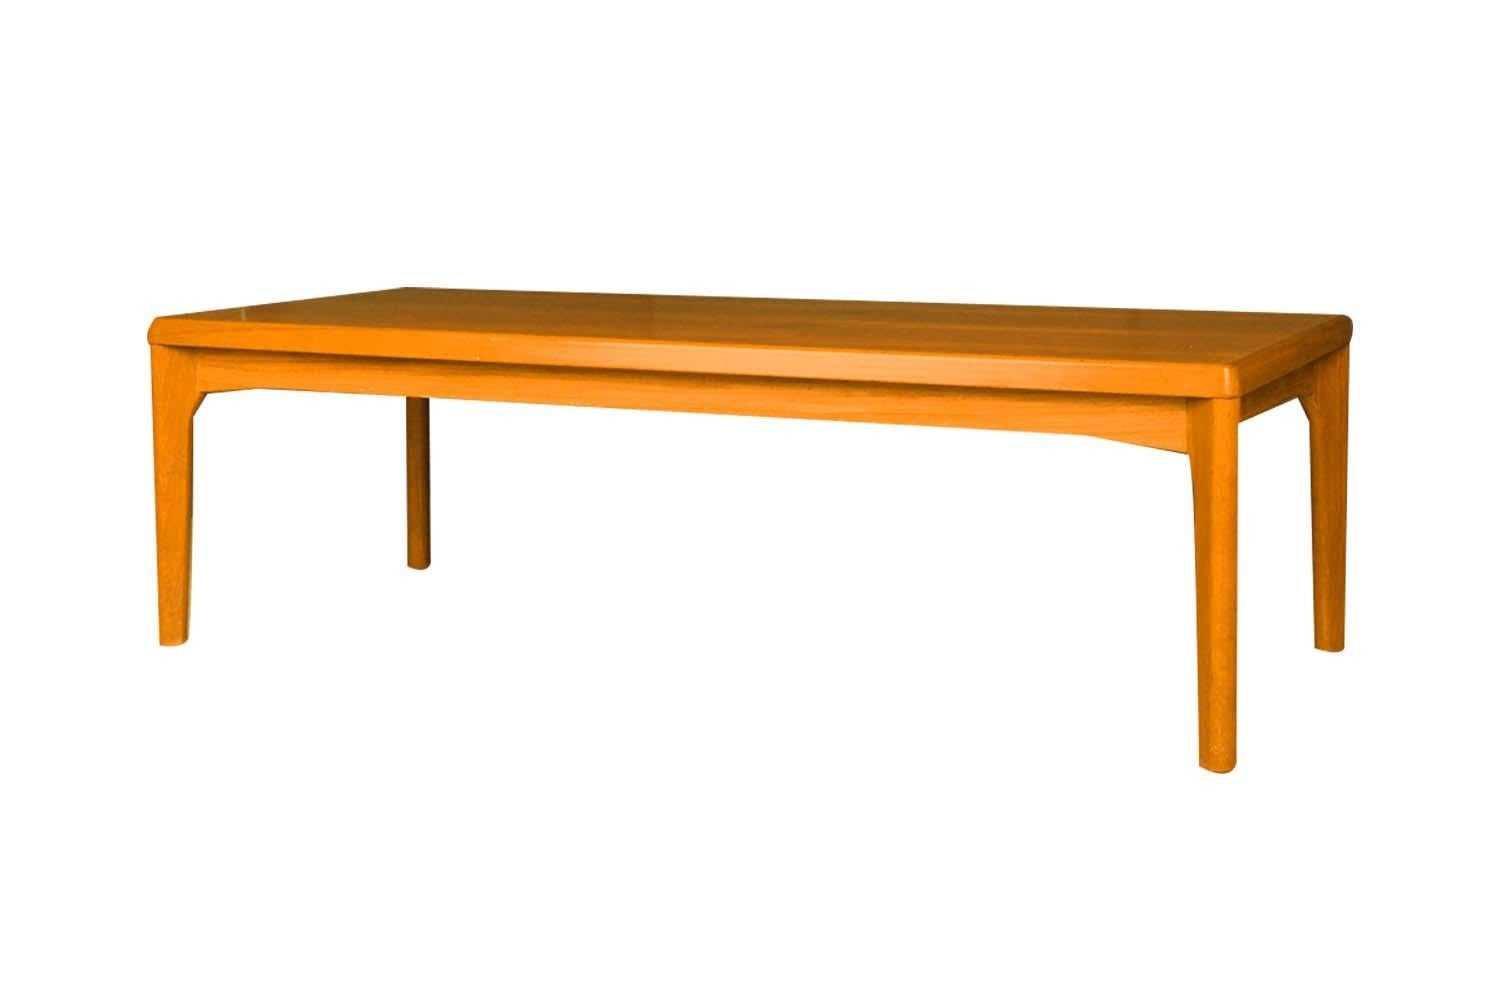 Exceptional Danish Modern teak, Mid-Century Modern, vintage Scandinavian design, teak, rectangular coffee table by Vejle Stole & Mobelfabrik, made in Denmark. Features a rectangle top with beautiful rich teak color and grain texture throughout.